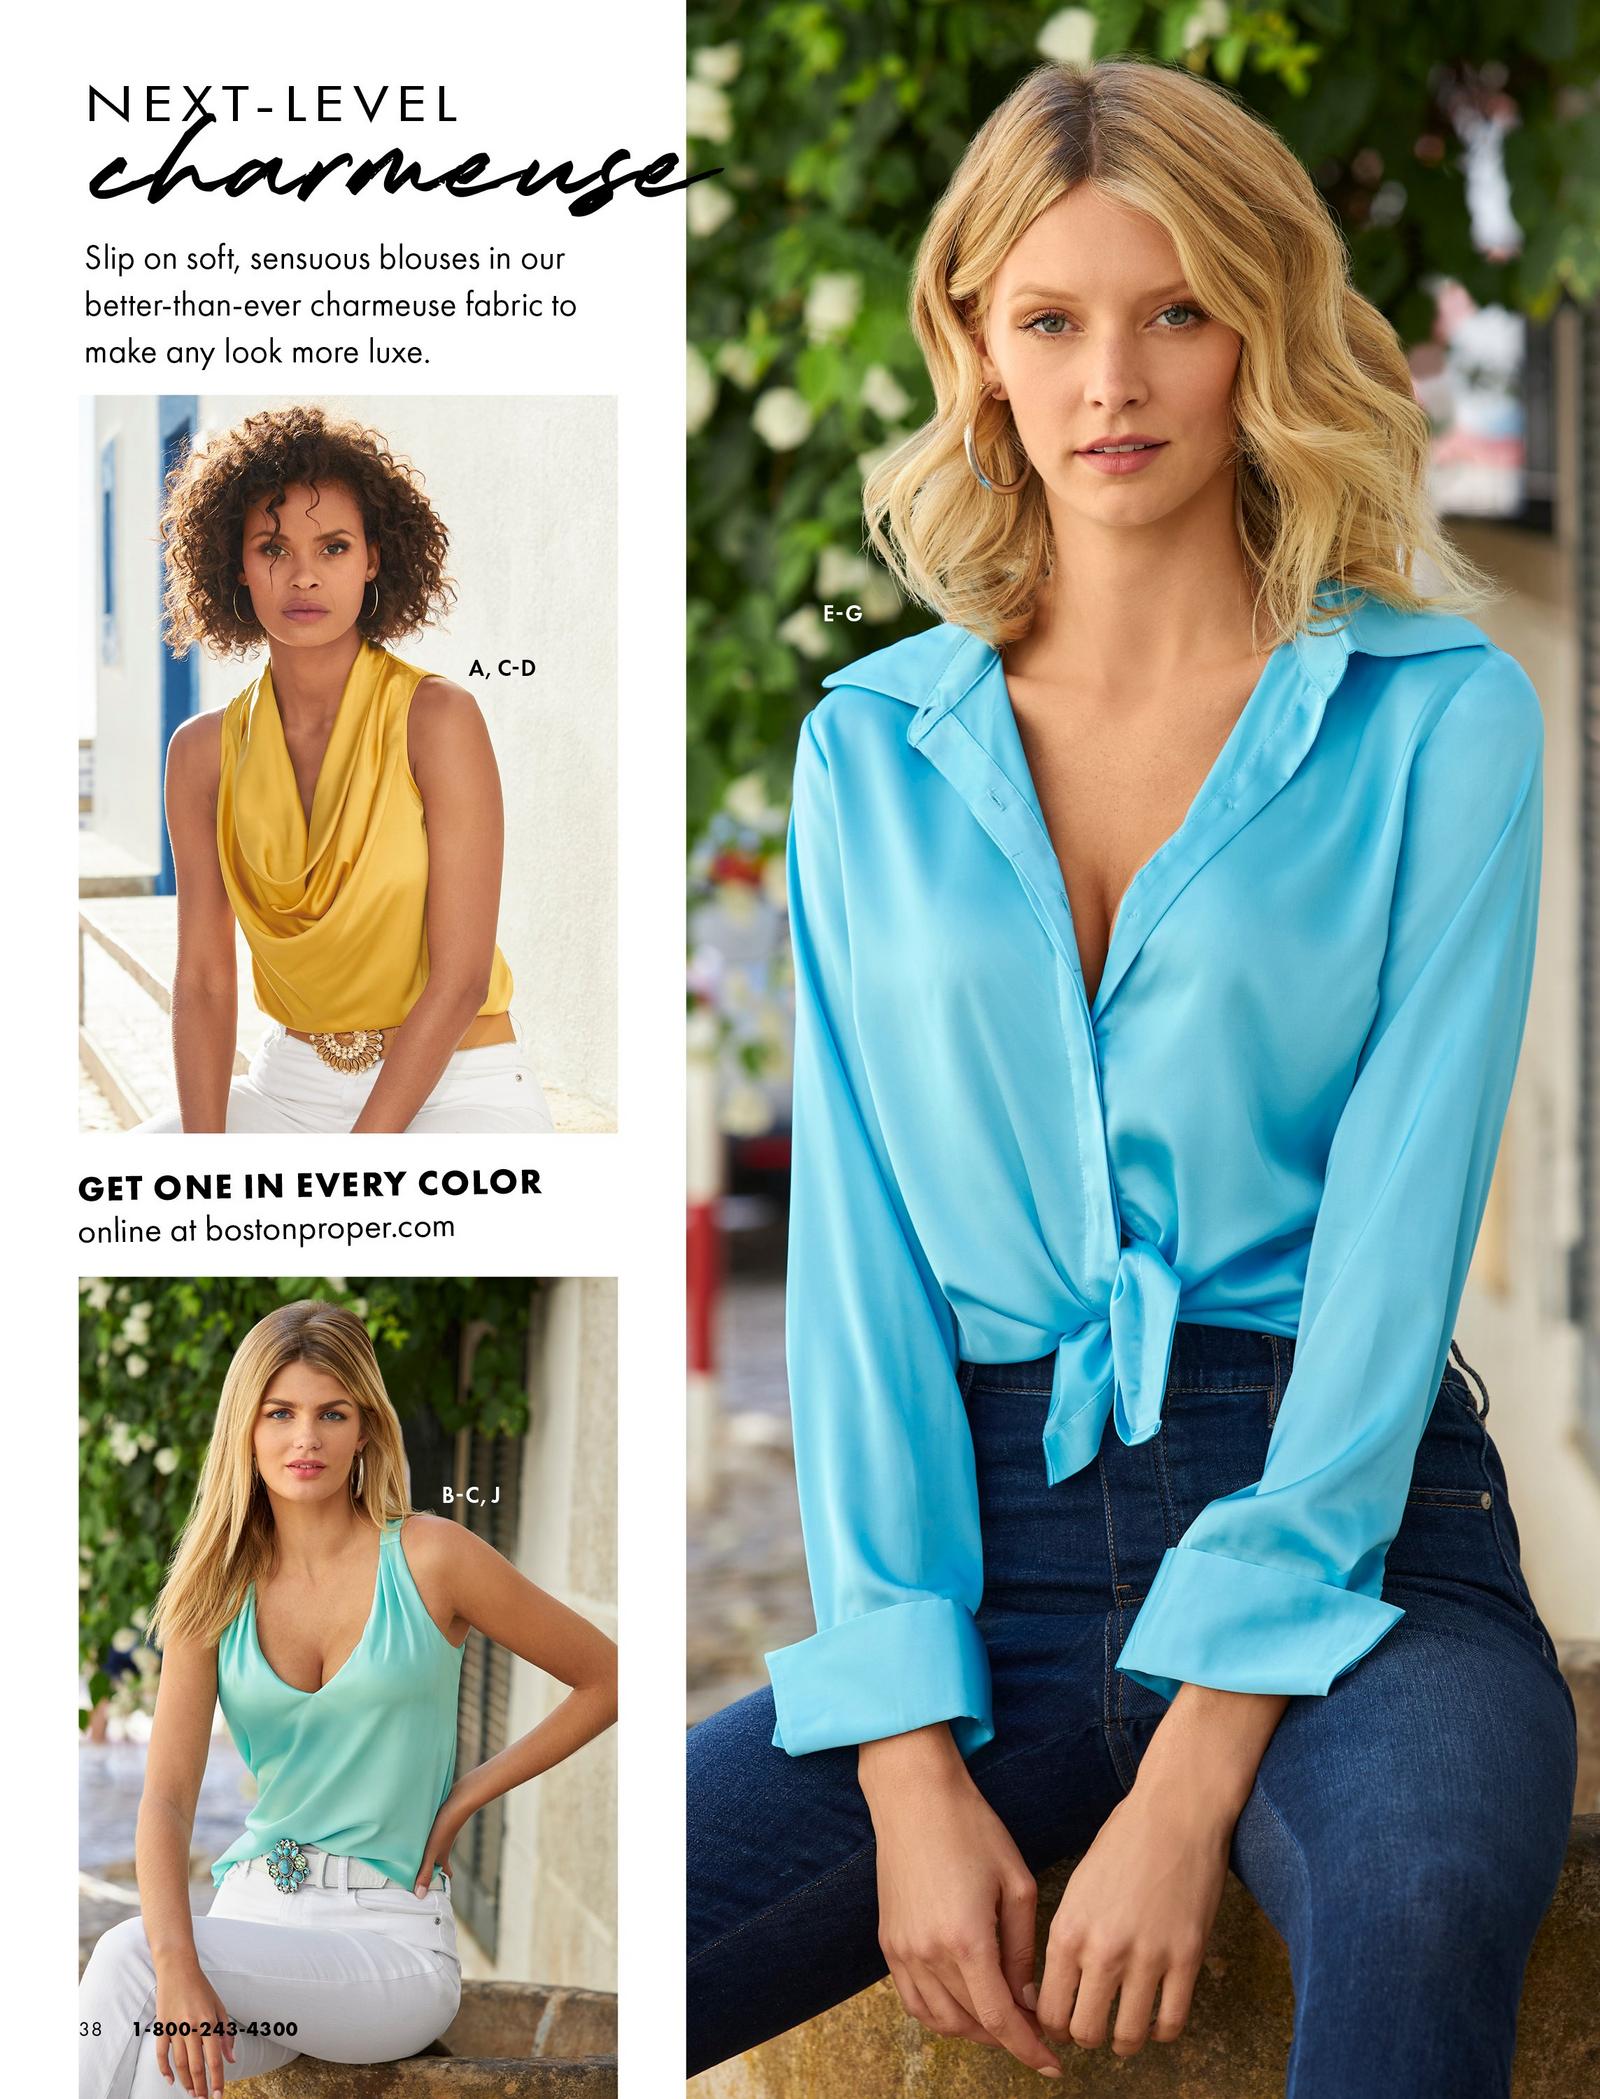 top left model wearing a yellow cowl neck sleeveless charmeuse blouse. bottom left model wearing a mint sleeveless v-neck charmeuse blouse. right model wearing a light blue long-sleeve button down charmeuse blouse that is knotted in front and jeans.